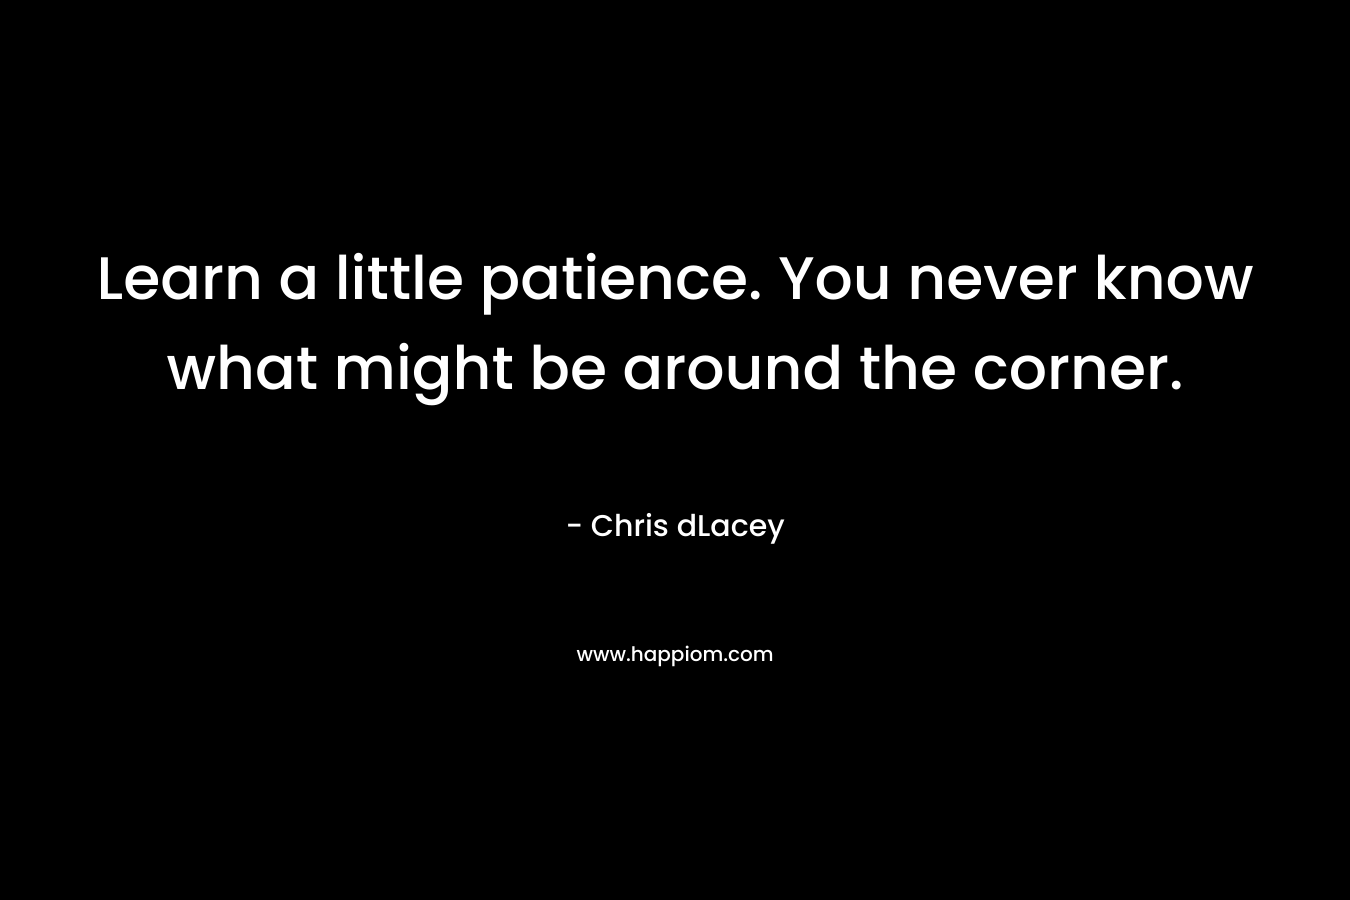 Learn a little patience. You never know what might be around the corner.